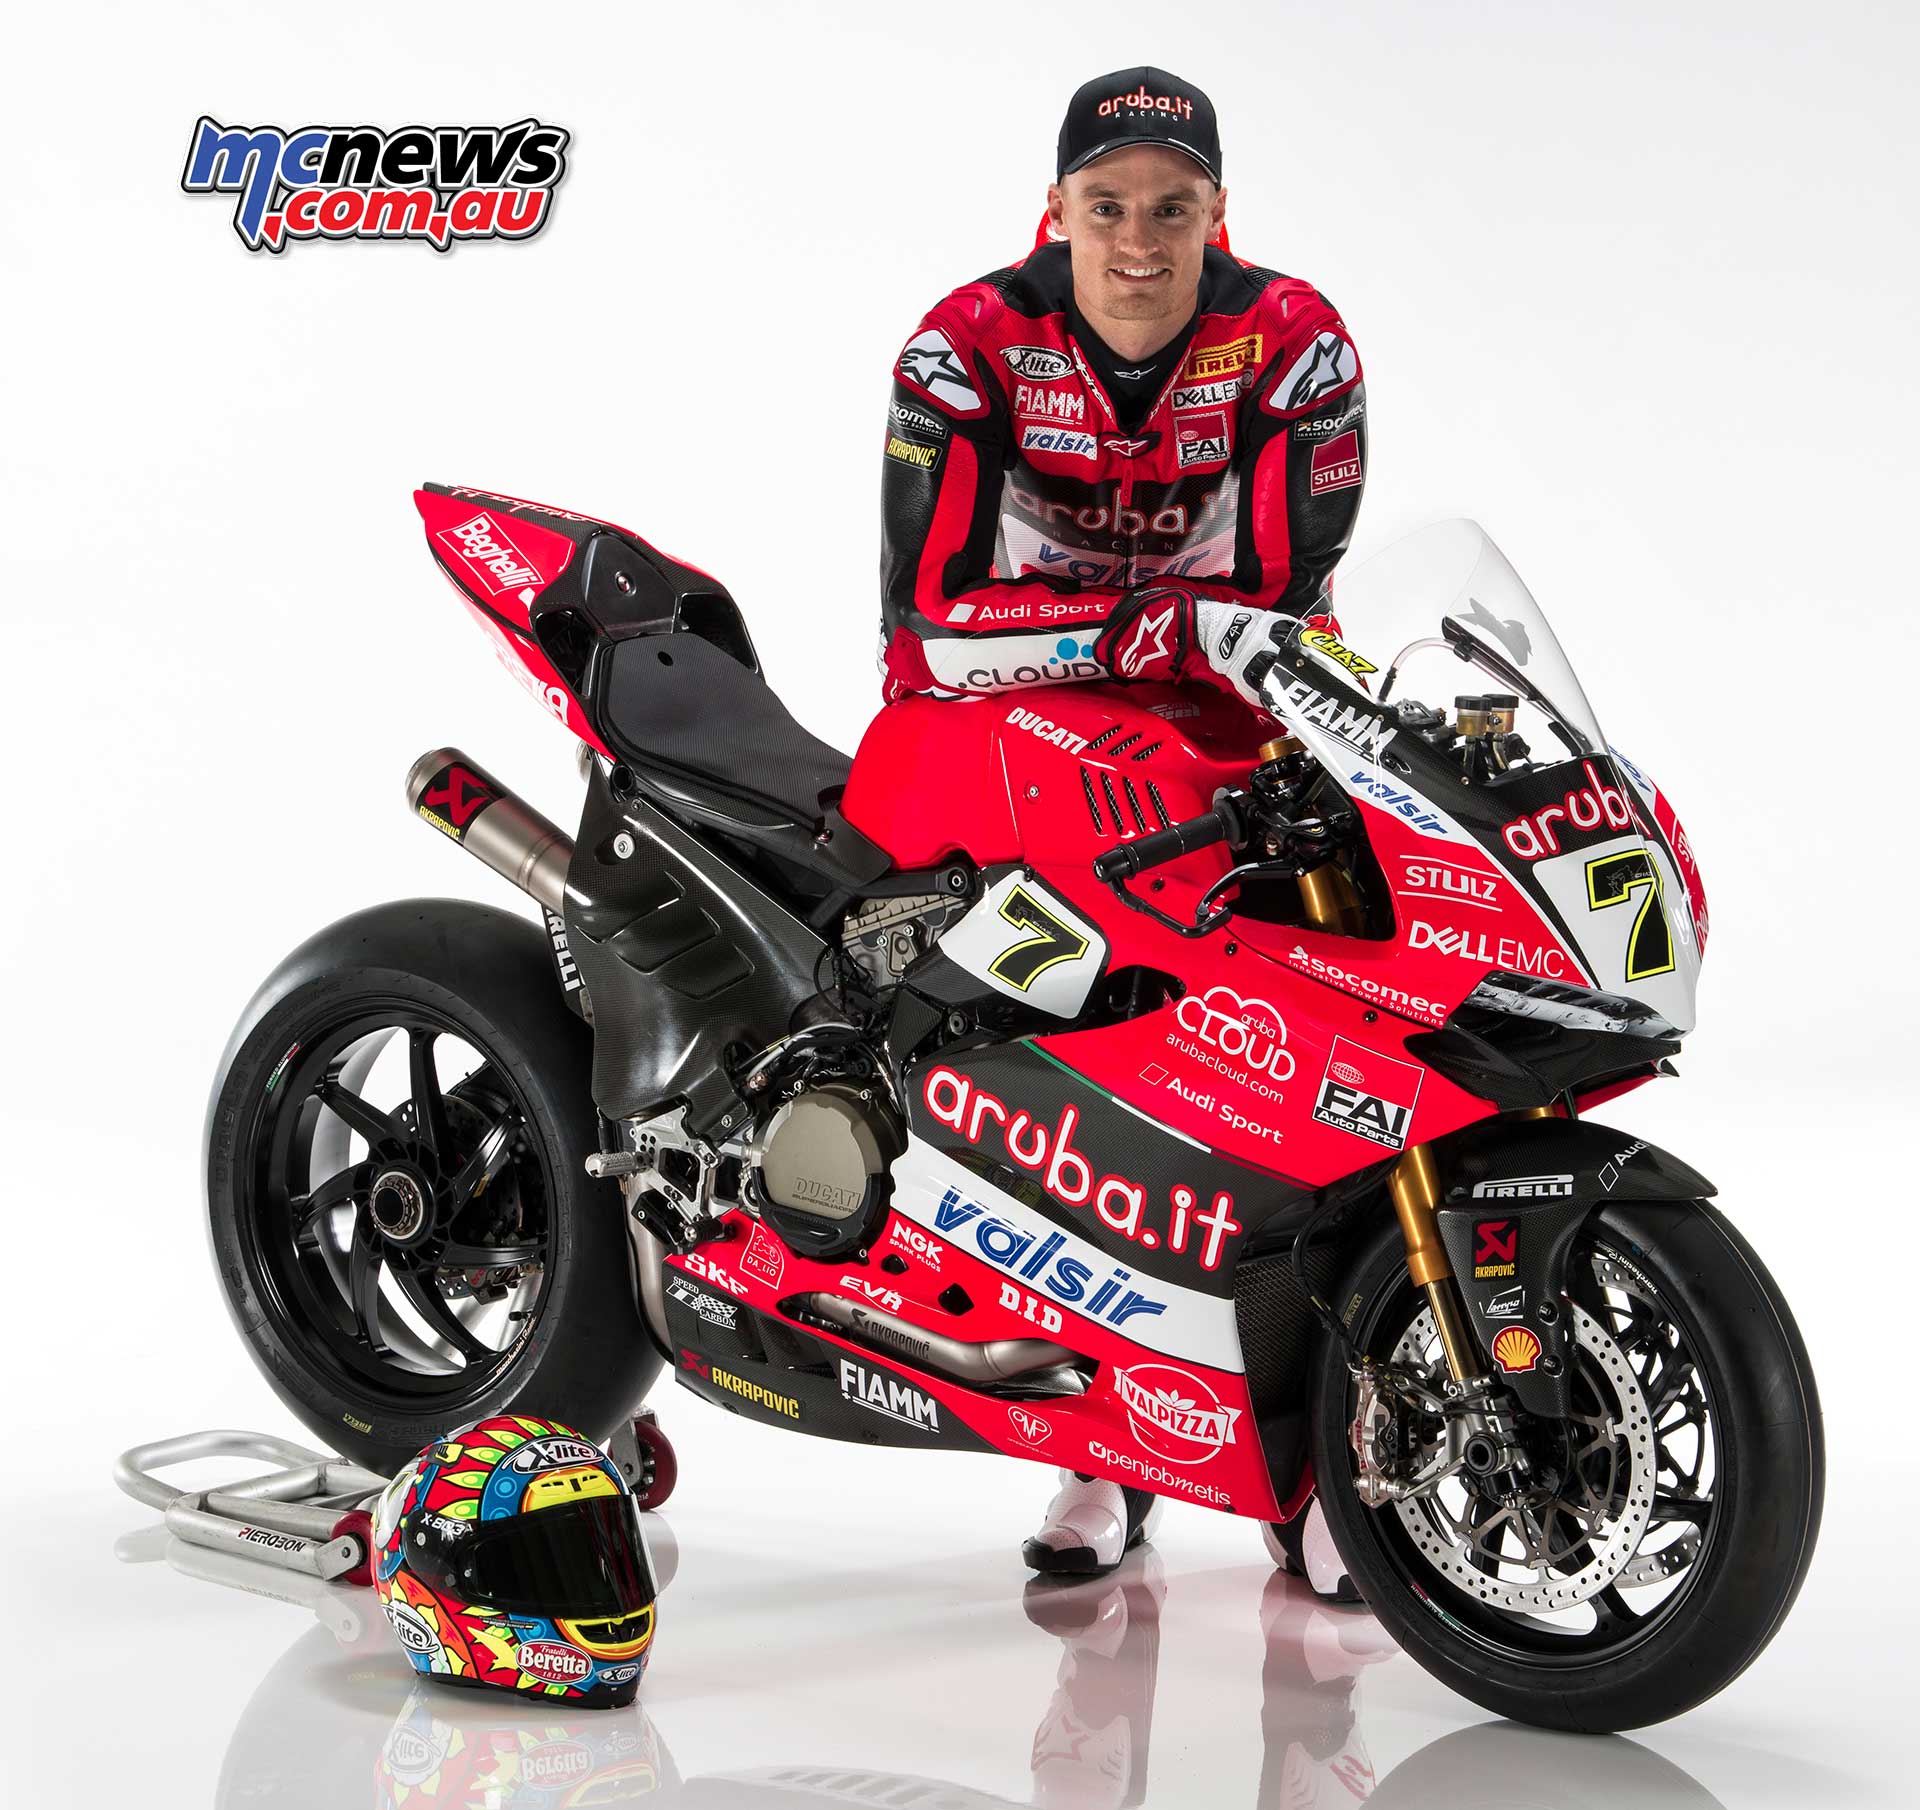 Ducati Worldsbk Launch 18 End Of The V Twin Era Motorcycle News Sport And Reviews